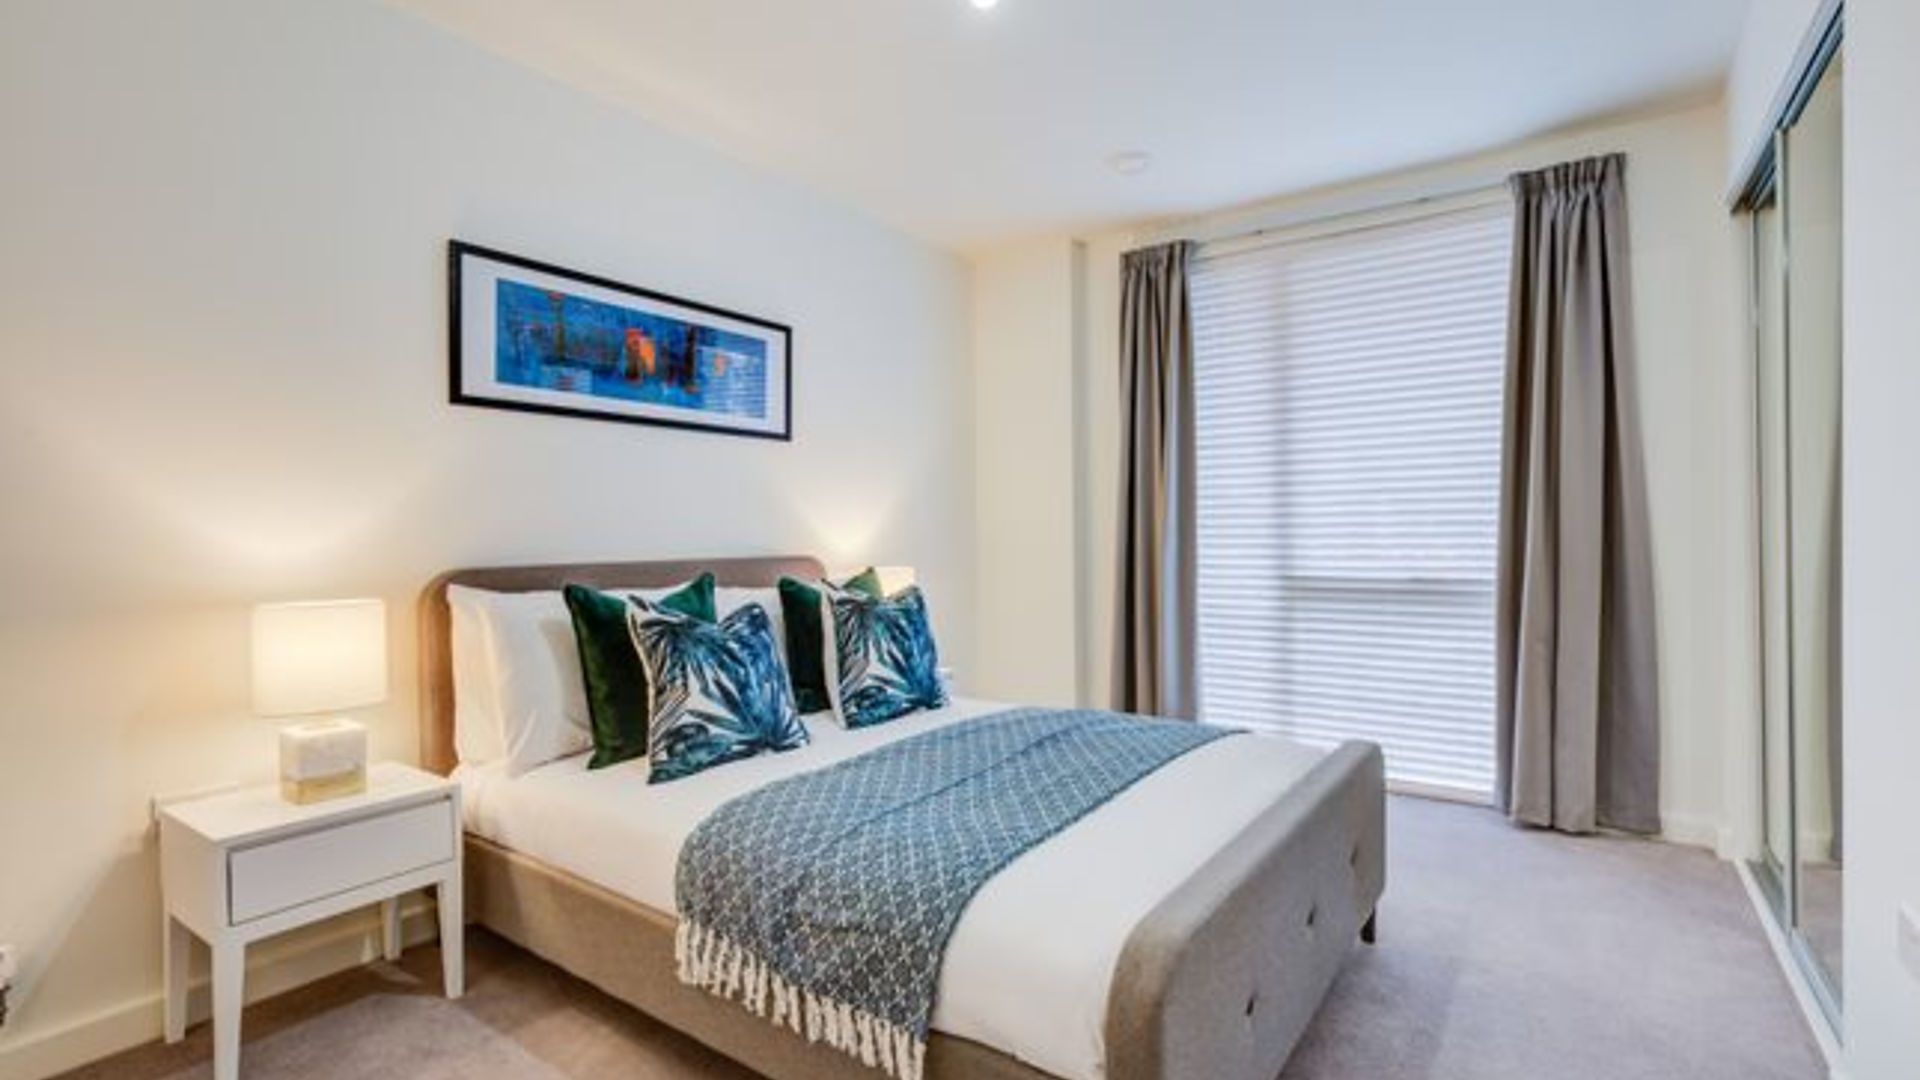 Apartments to Rent by Hera at Hornchurch, Havering, RM11, bedroom